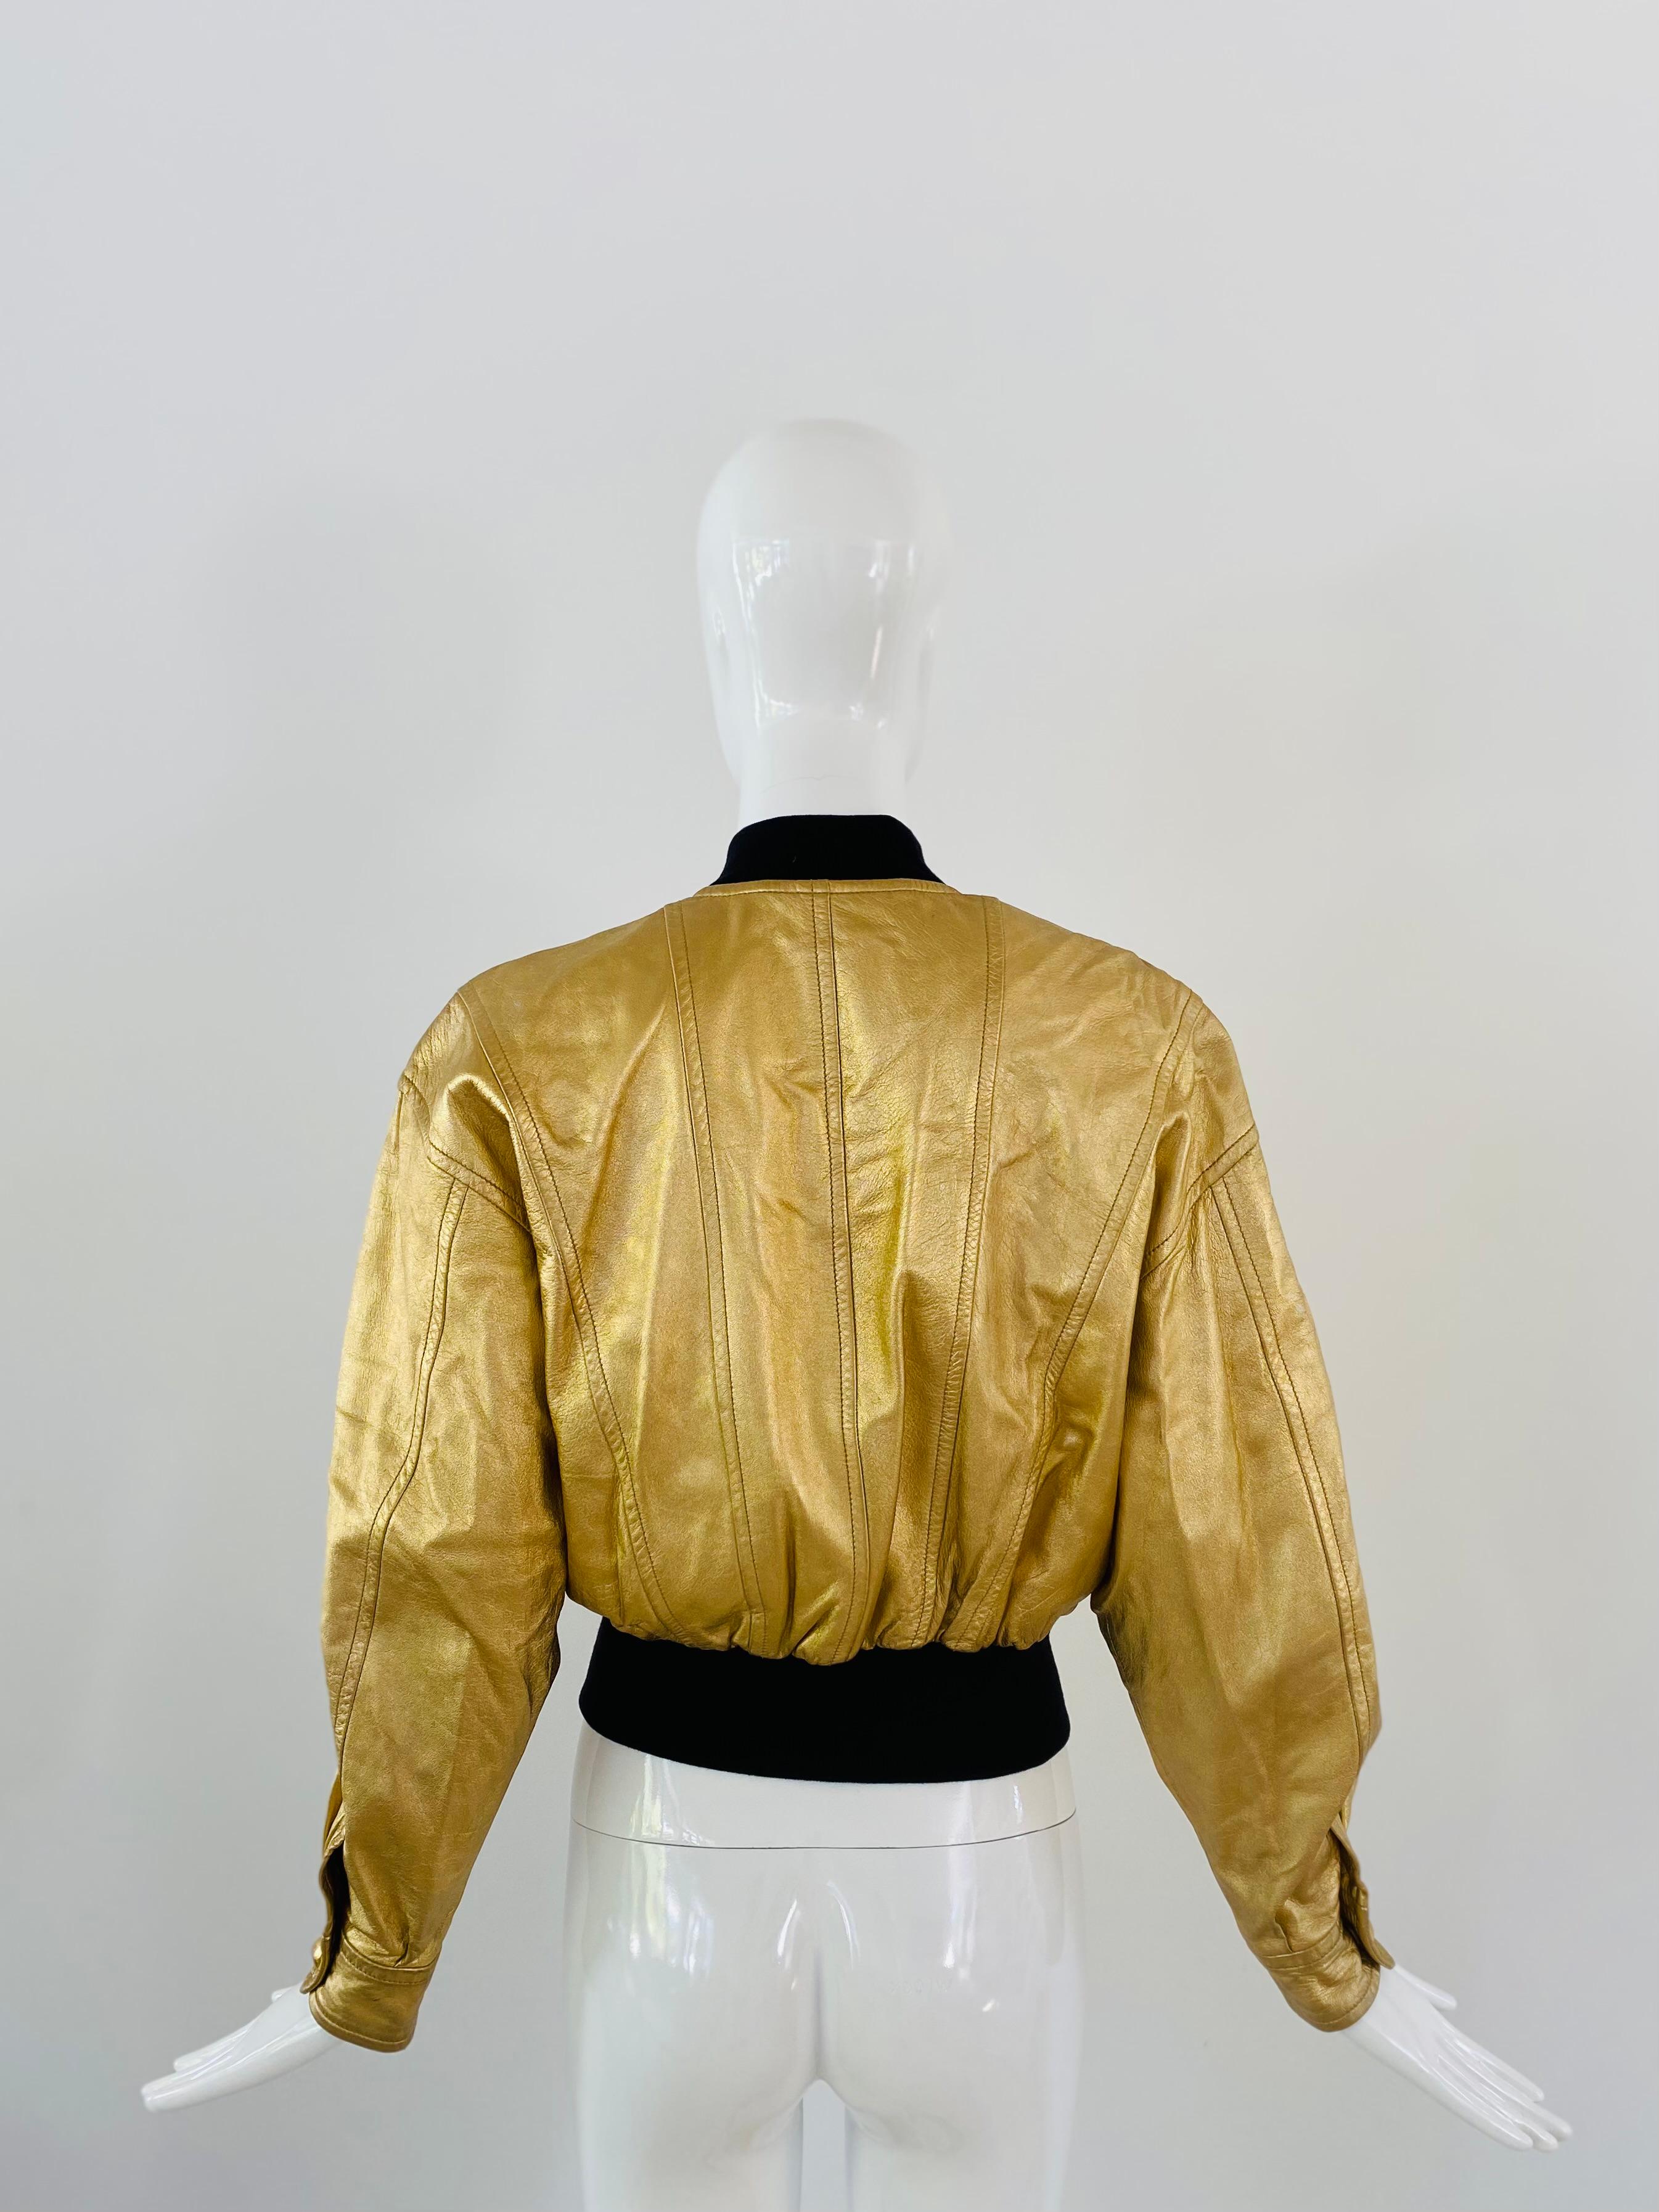 1990s Escada leather bomber jacket in gold leather with embroidered stars, gold snap buttons, and a stretchable waistband. Some fading to the gold on the leather and a hole was made in the inside lining of the jacket which has been patched up.